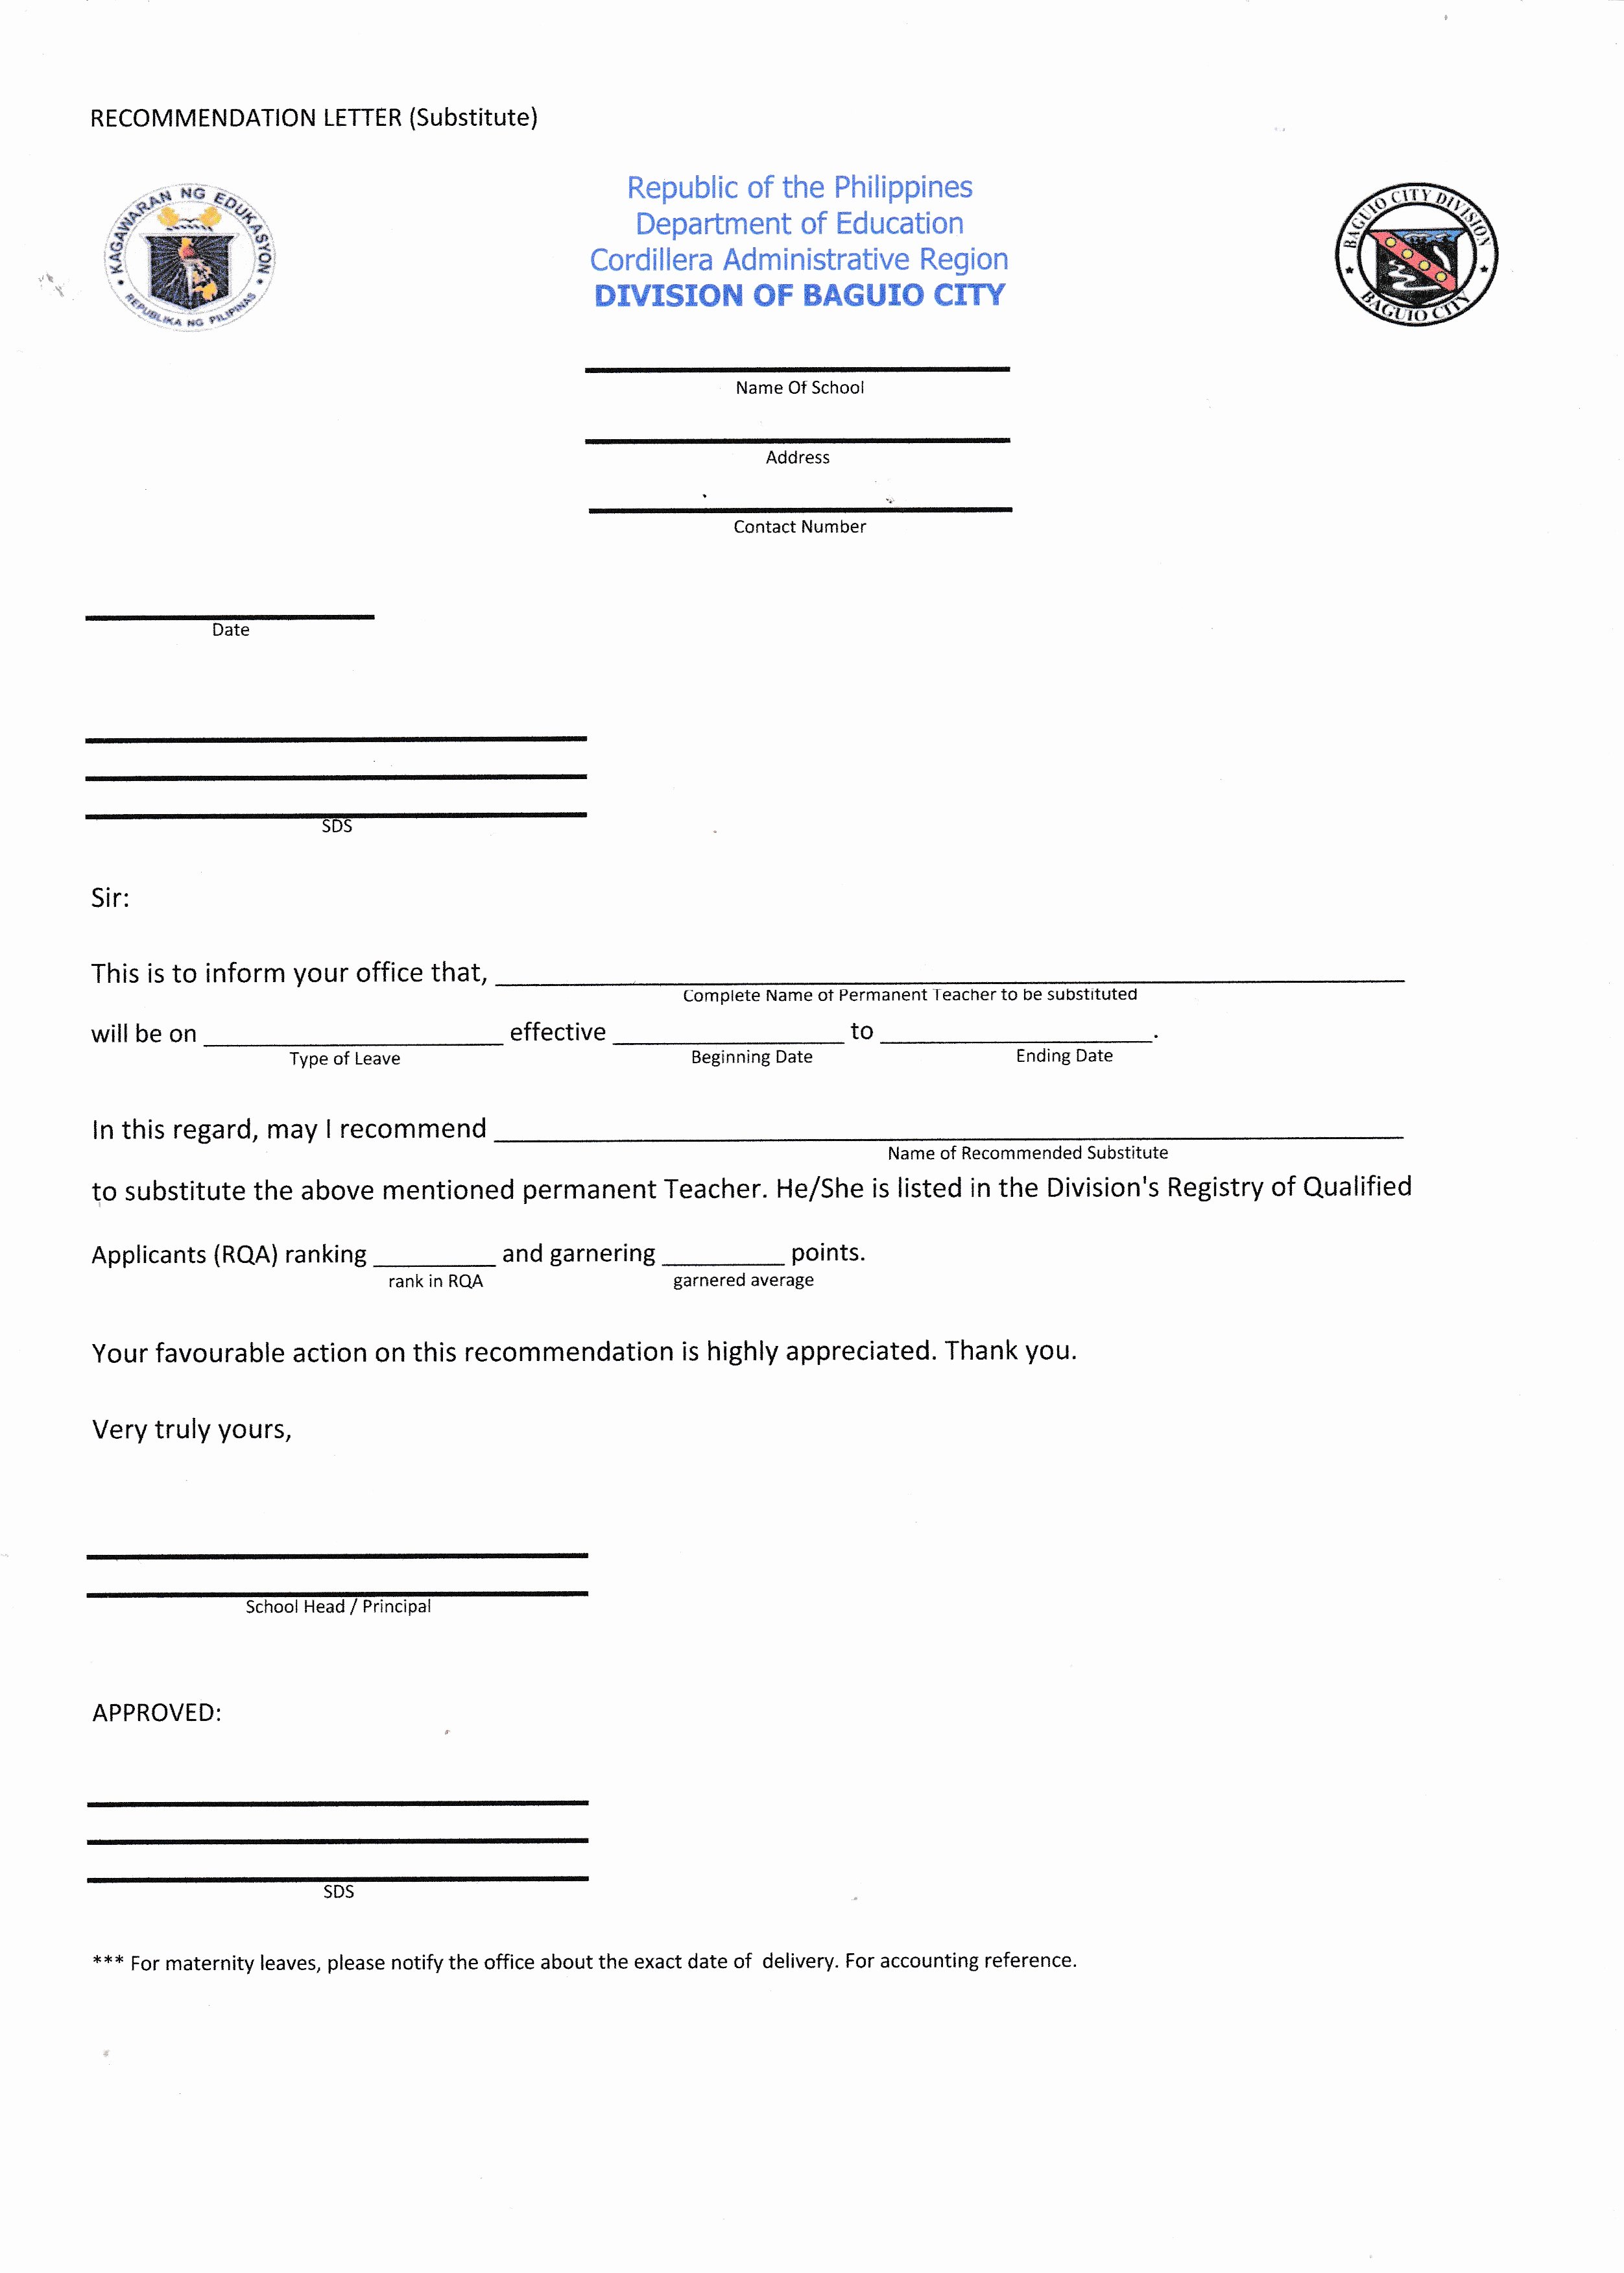 Recommendation Letter for Substitute Teacher Inspirational Re Mendation Letter Template for Substitute — Deped